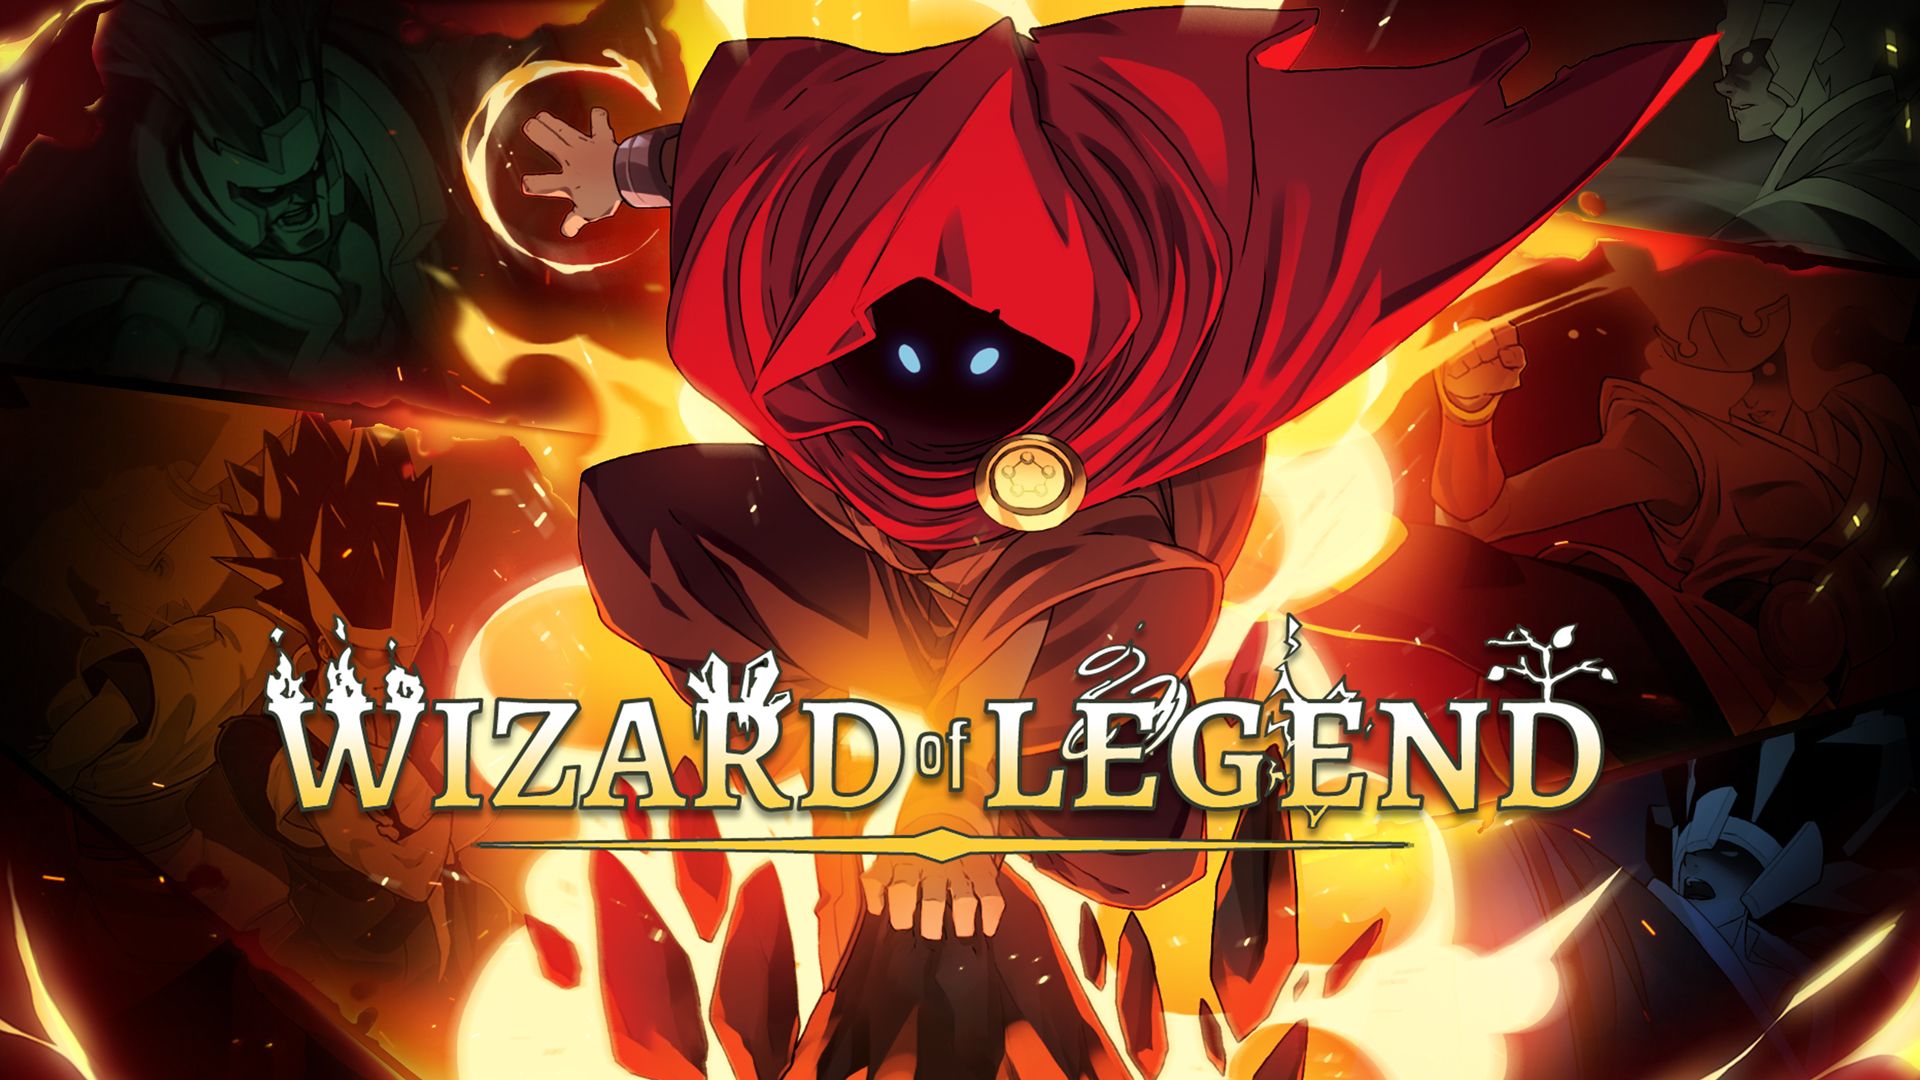 Wizard Of Legend Is Getting A Mobile Port With Reworked Ui Control Scheme